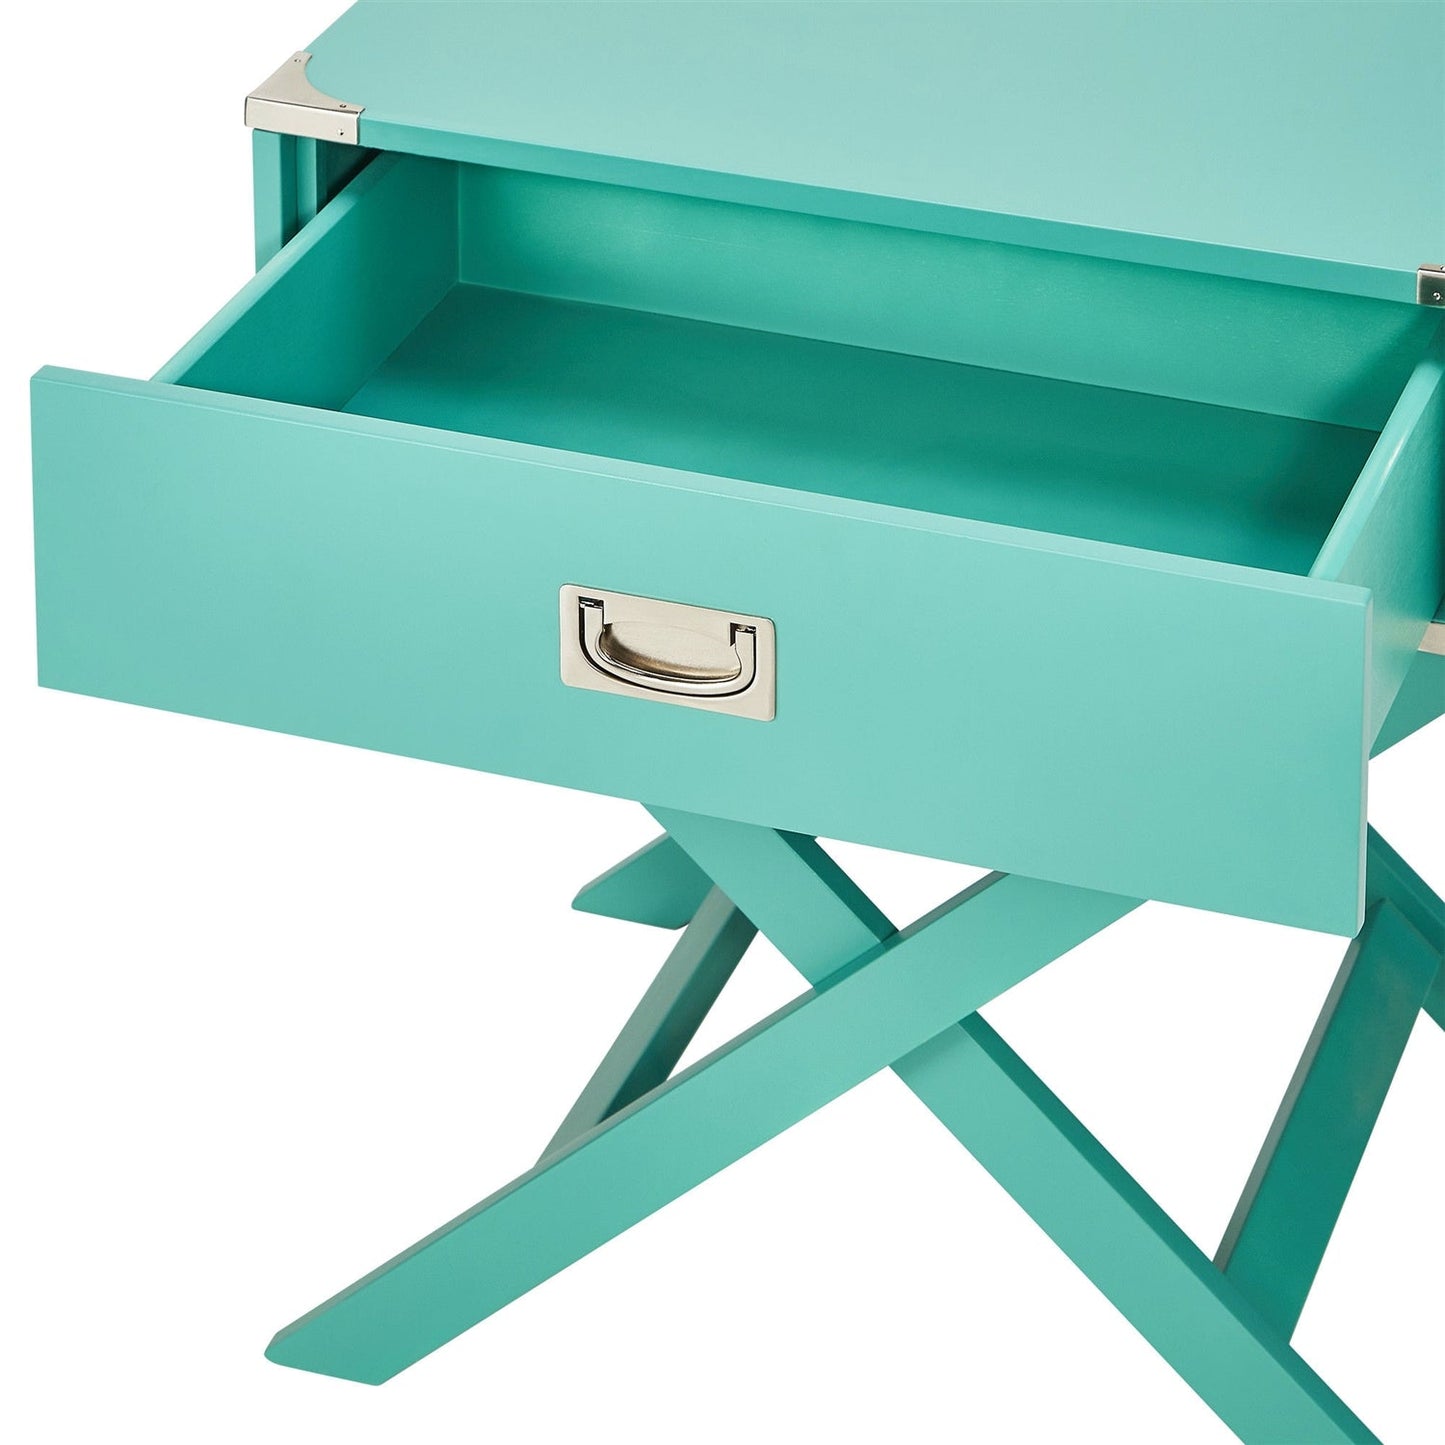 Living Room > Coffee Tables - Marine Green Turquoise 1-Drawer Modern End Table Nightstand